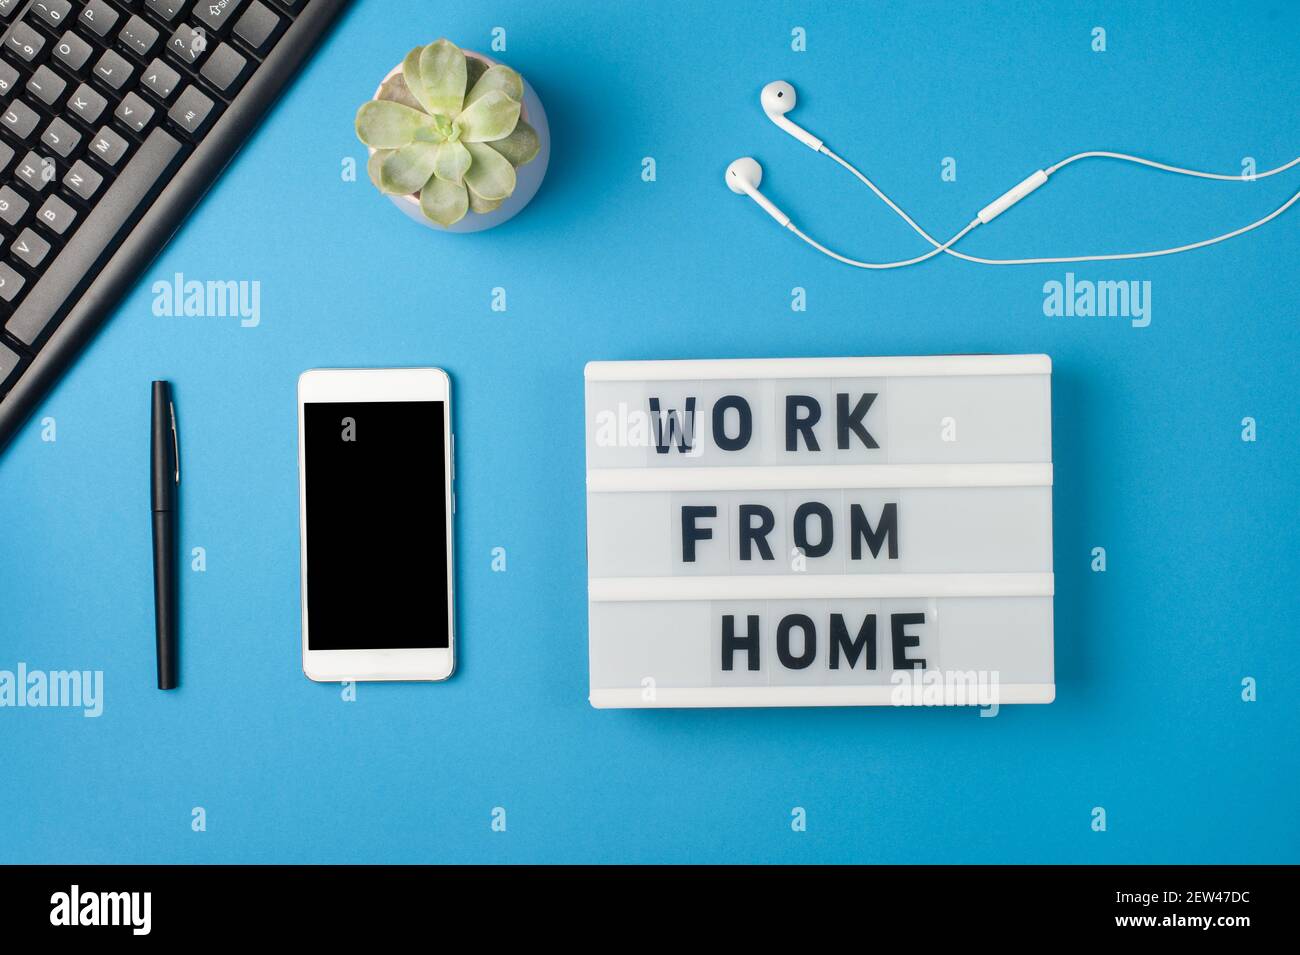 Work from home - text on display lightbox and smartphone mockup on blue background workplace. Black keyboard and white earphones. Freelance work conce Stock Photo